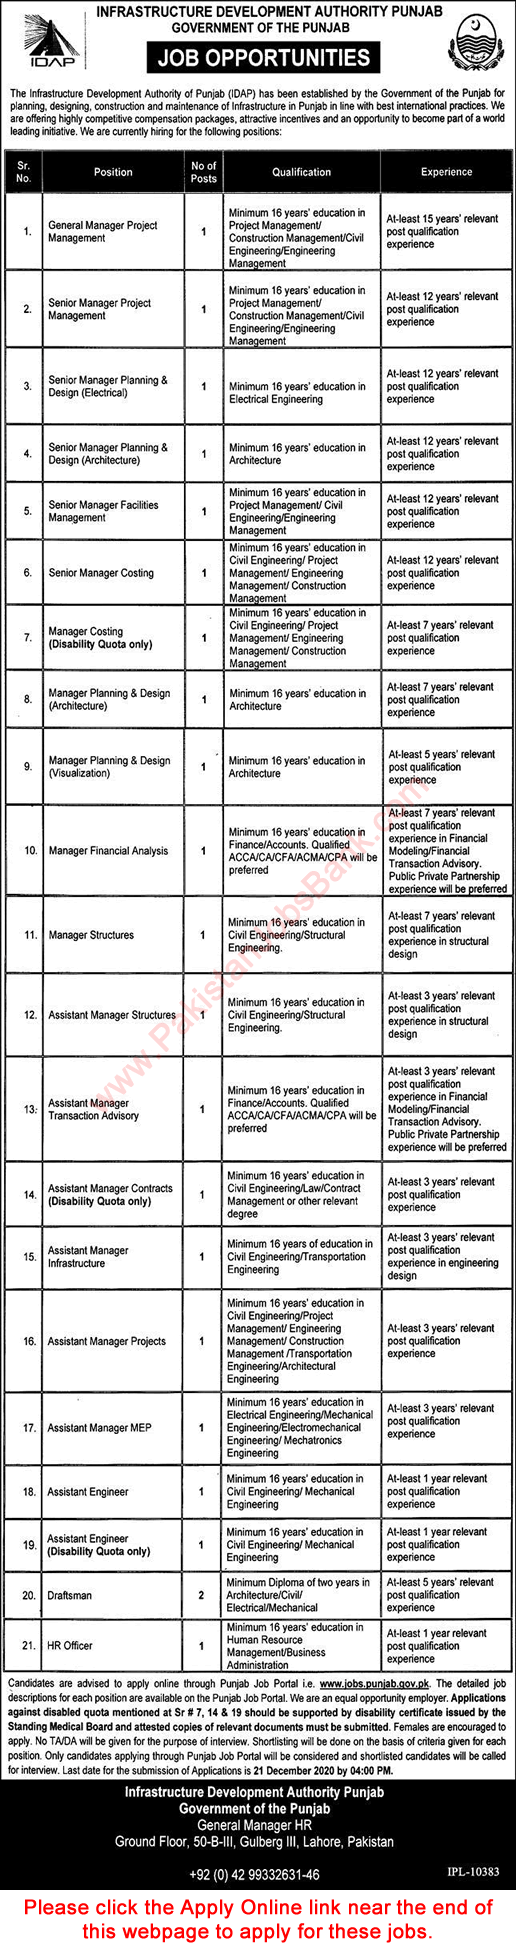 Infrastructure Development Authority Punjab Jobs December 2020 Apply Online IDAP Assistant Managers & Others Latest